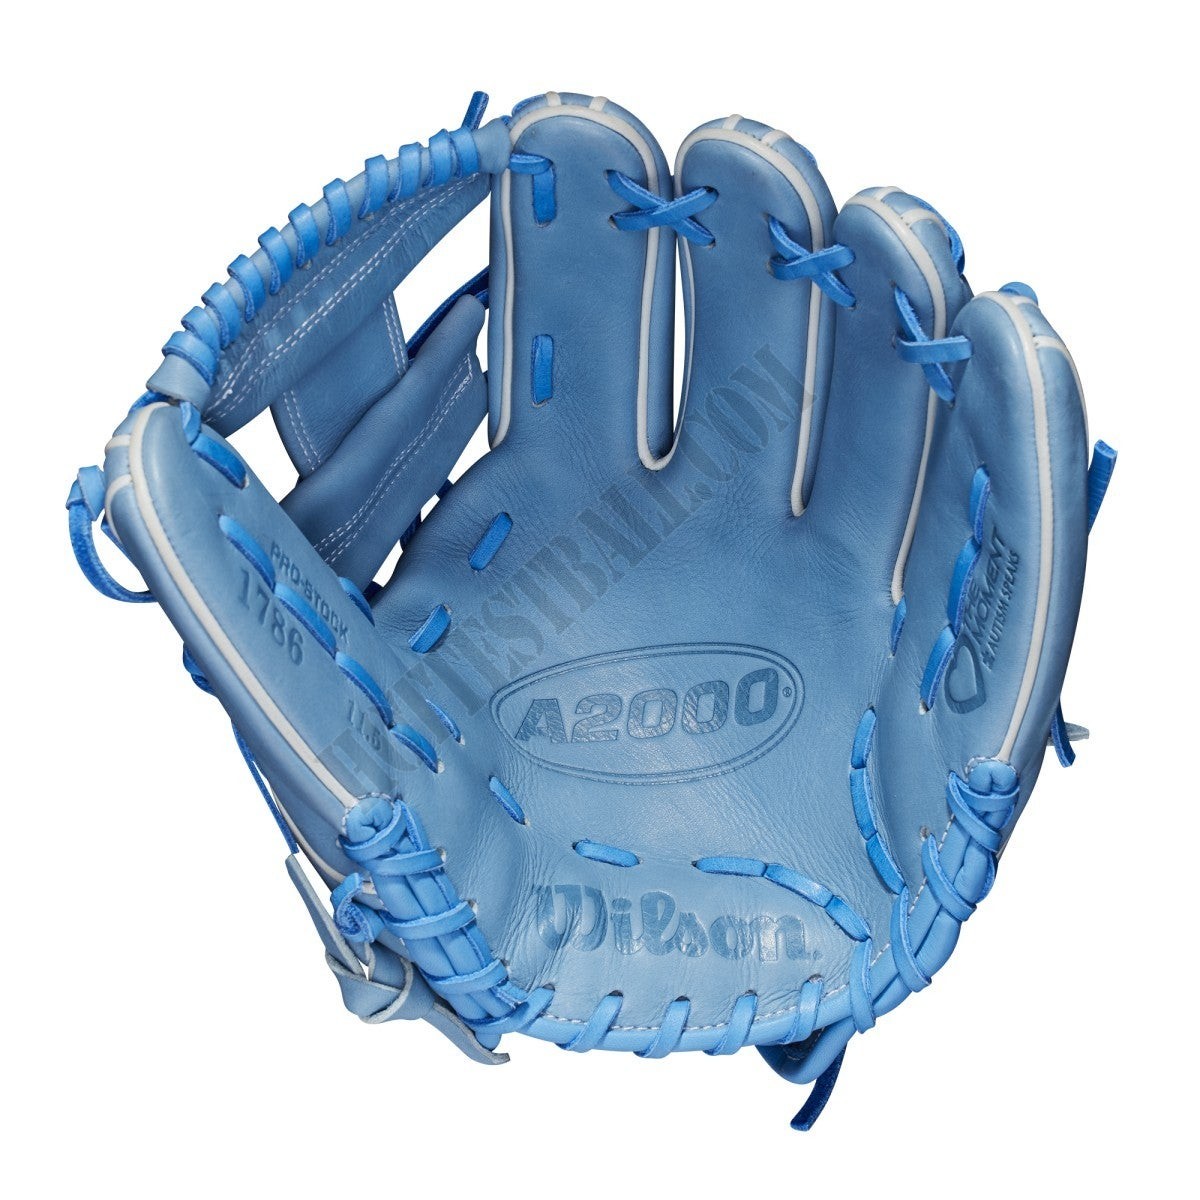 2020 Autism Speaks A2000 1786 11.5" Infield Baseball Glove - Limited Edition ● Wilson Promotions - -2